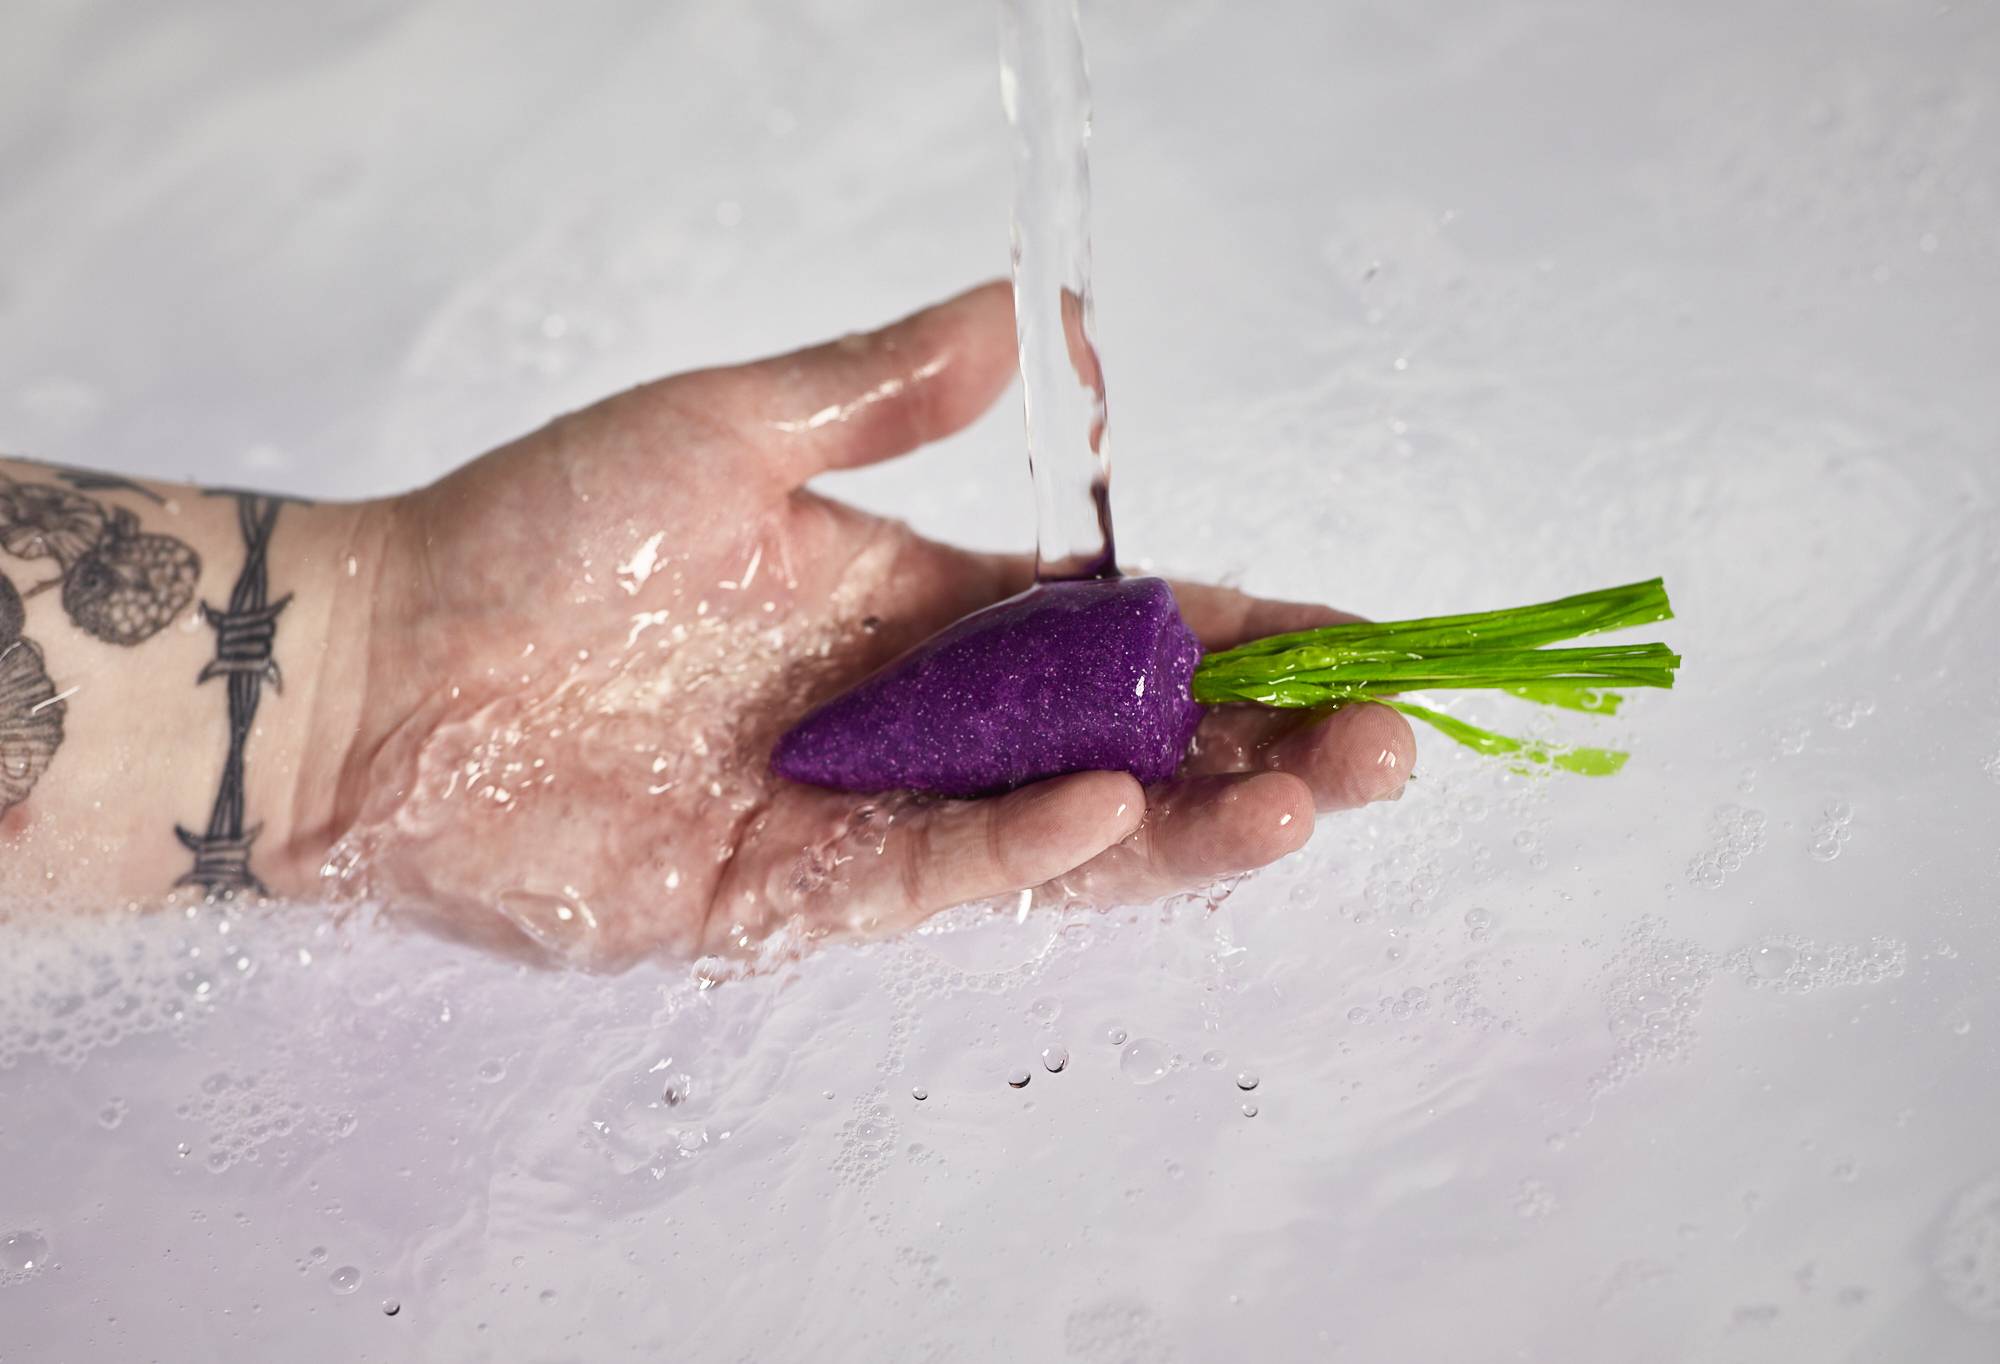 A close-up image of the model's hand holding the purple carrot bubble bar under running water.